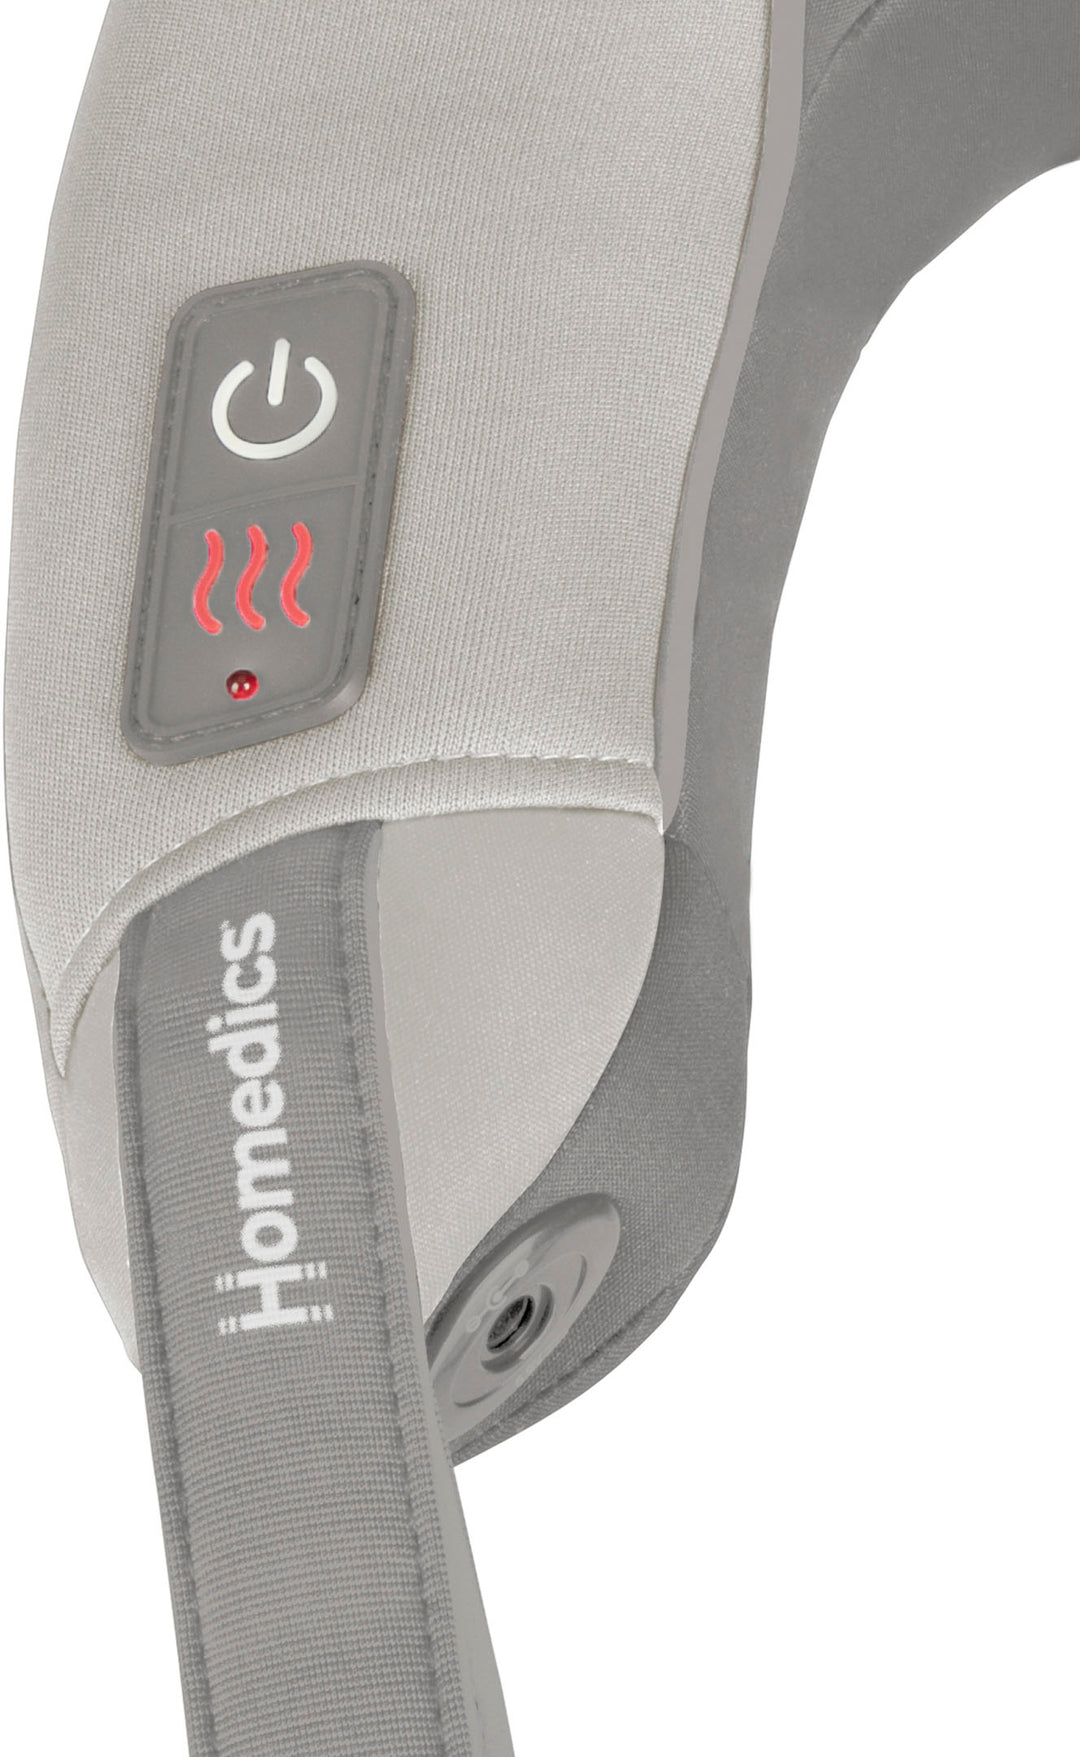 HoMedics - Pro Therapy Vibration Neck Massager with Soothing Heat - Tan_5